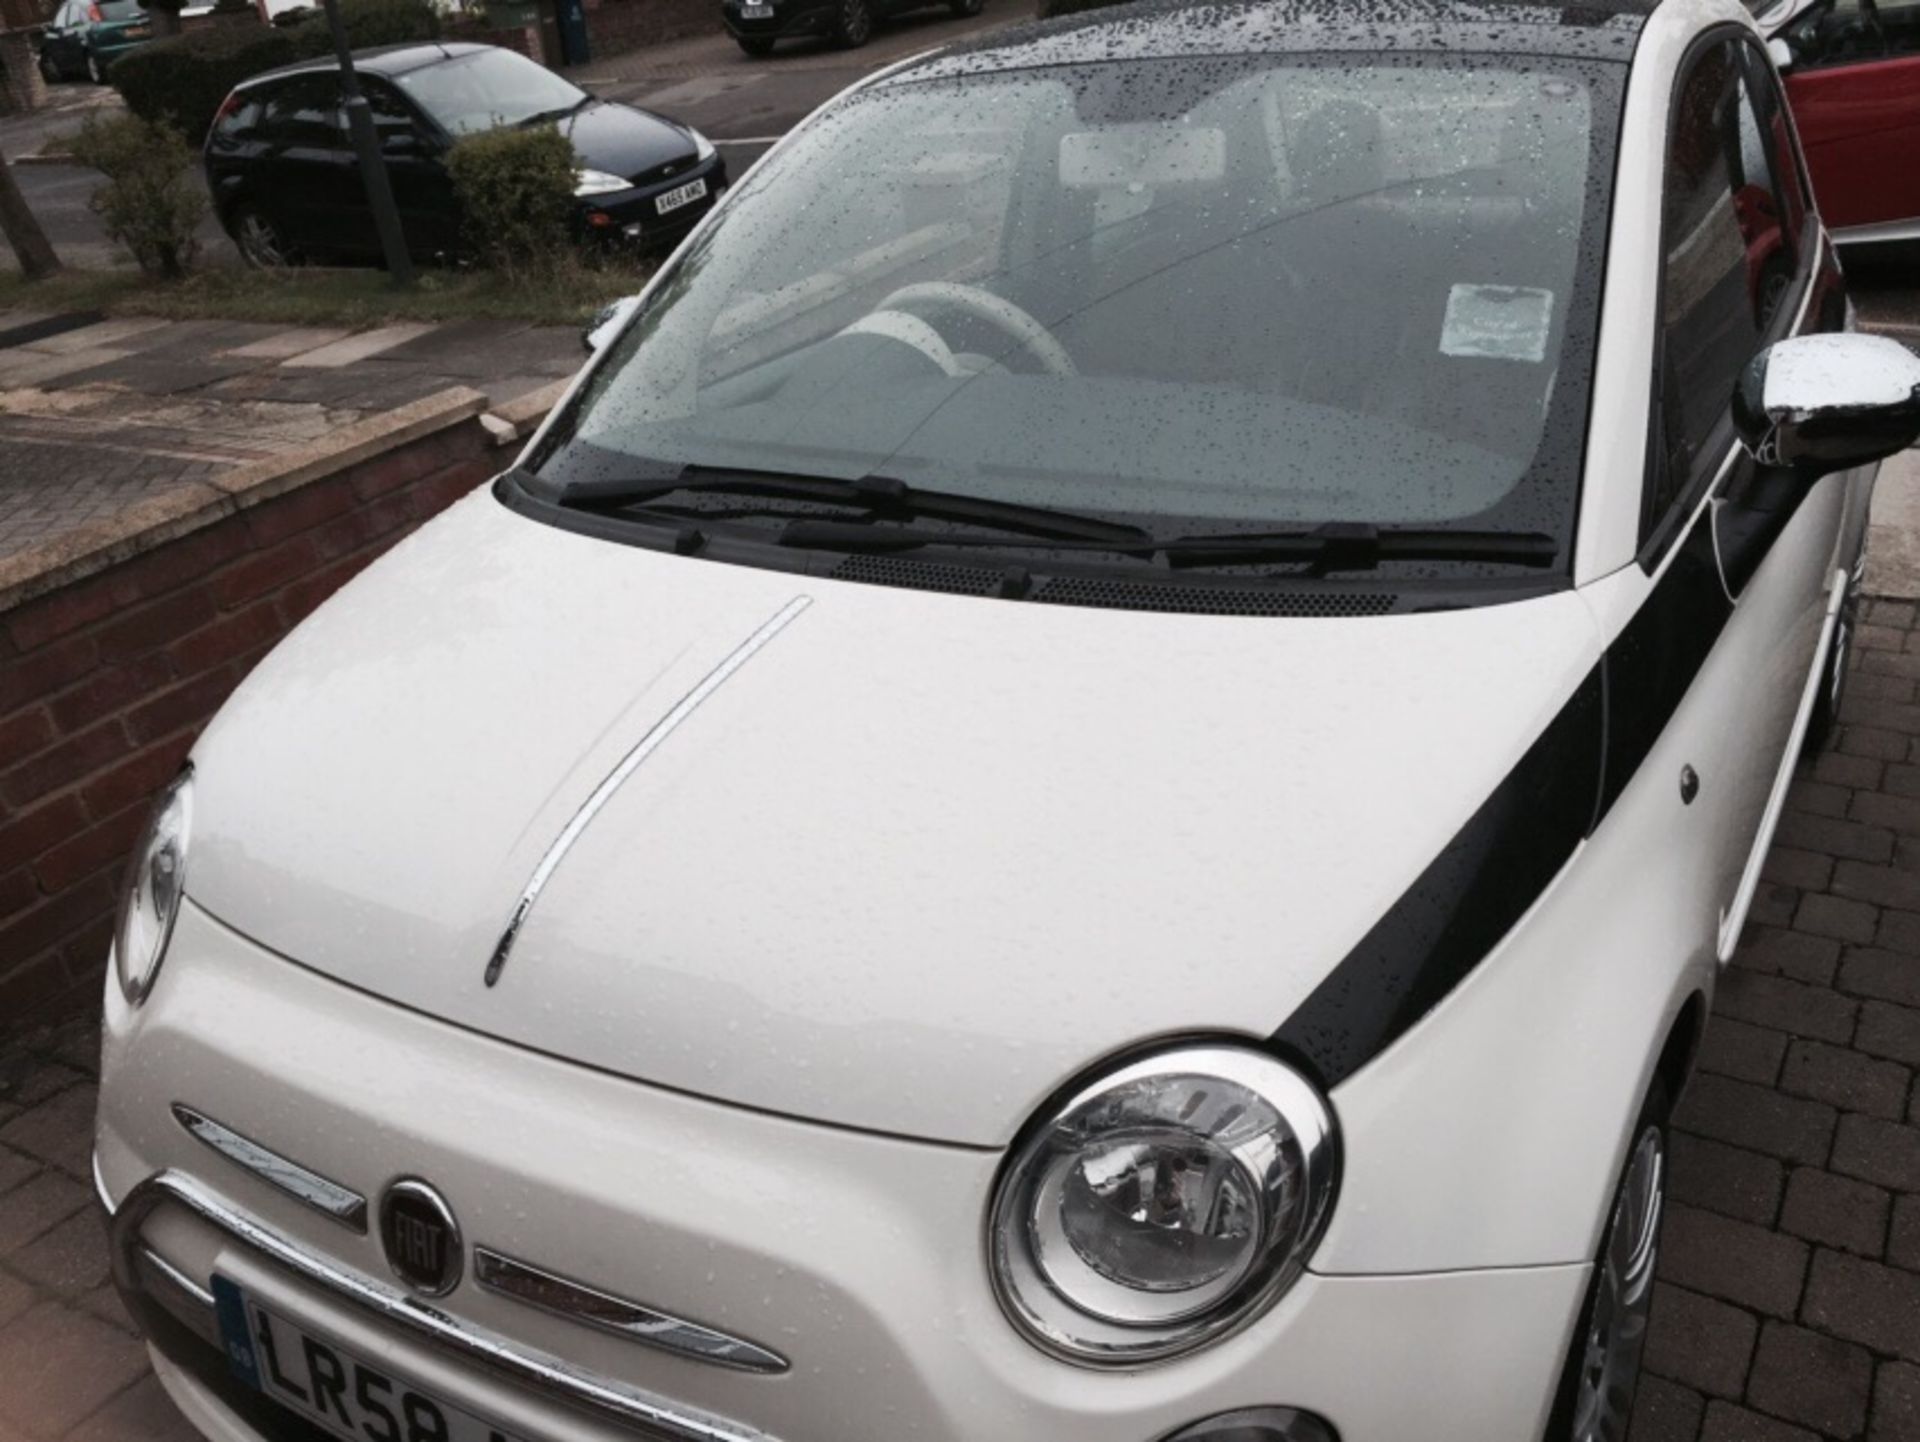 58 Plate Fiat 500 Lounge 3 Door Hatchback - White - Features Premium Extras - NO VAT on the Hammer - - Image 2 of 33